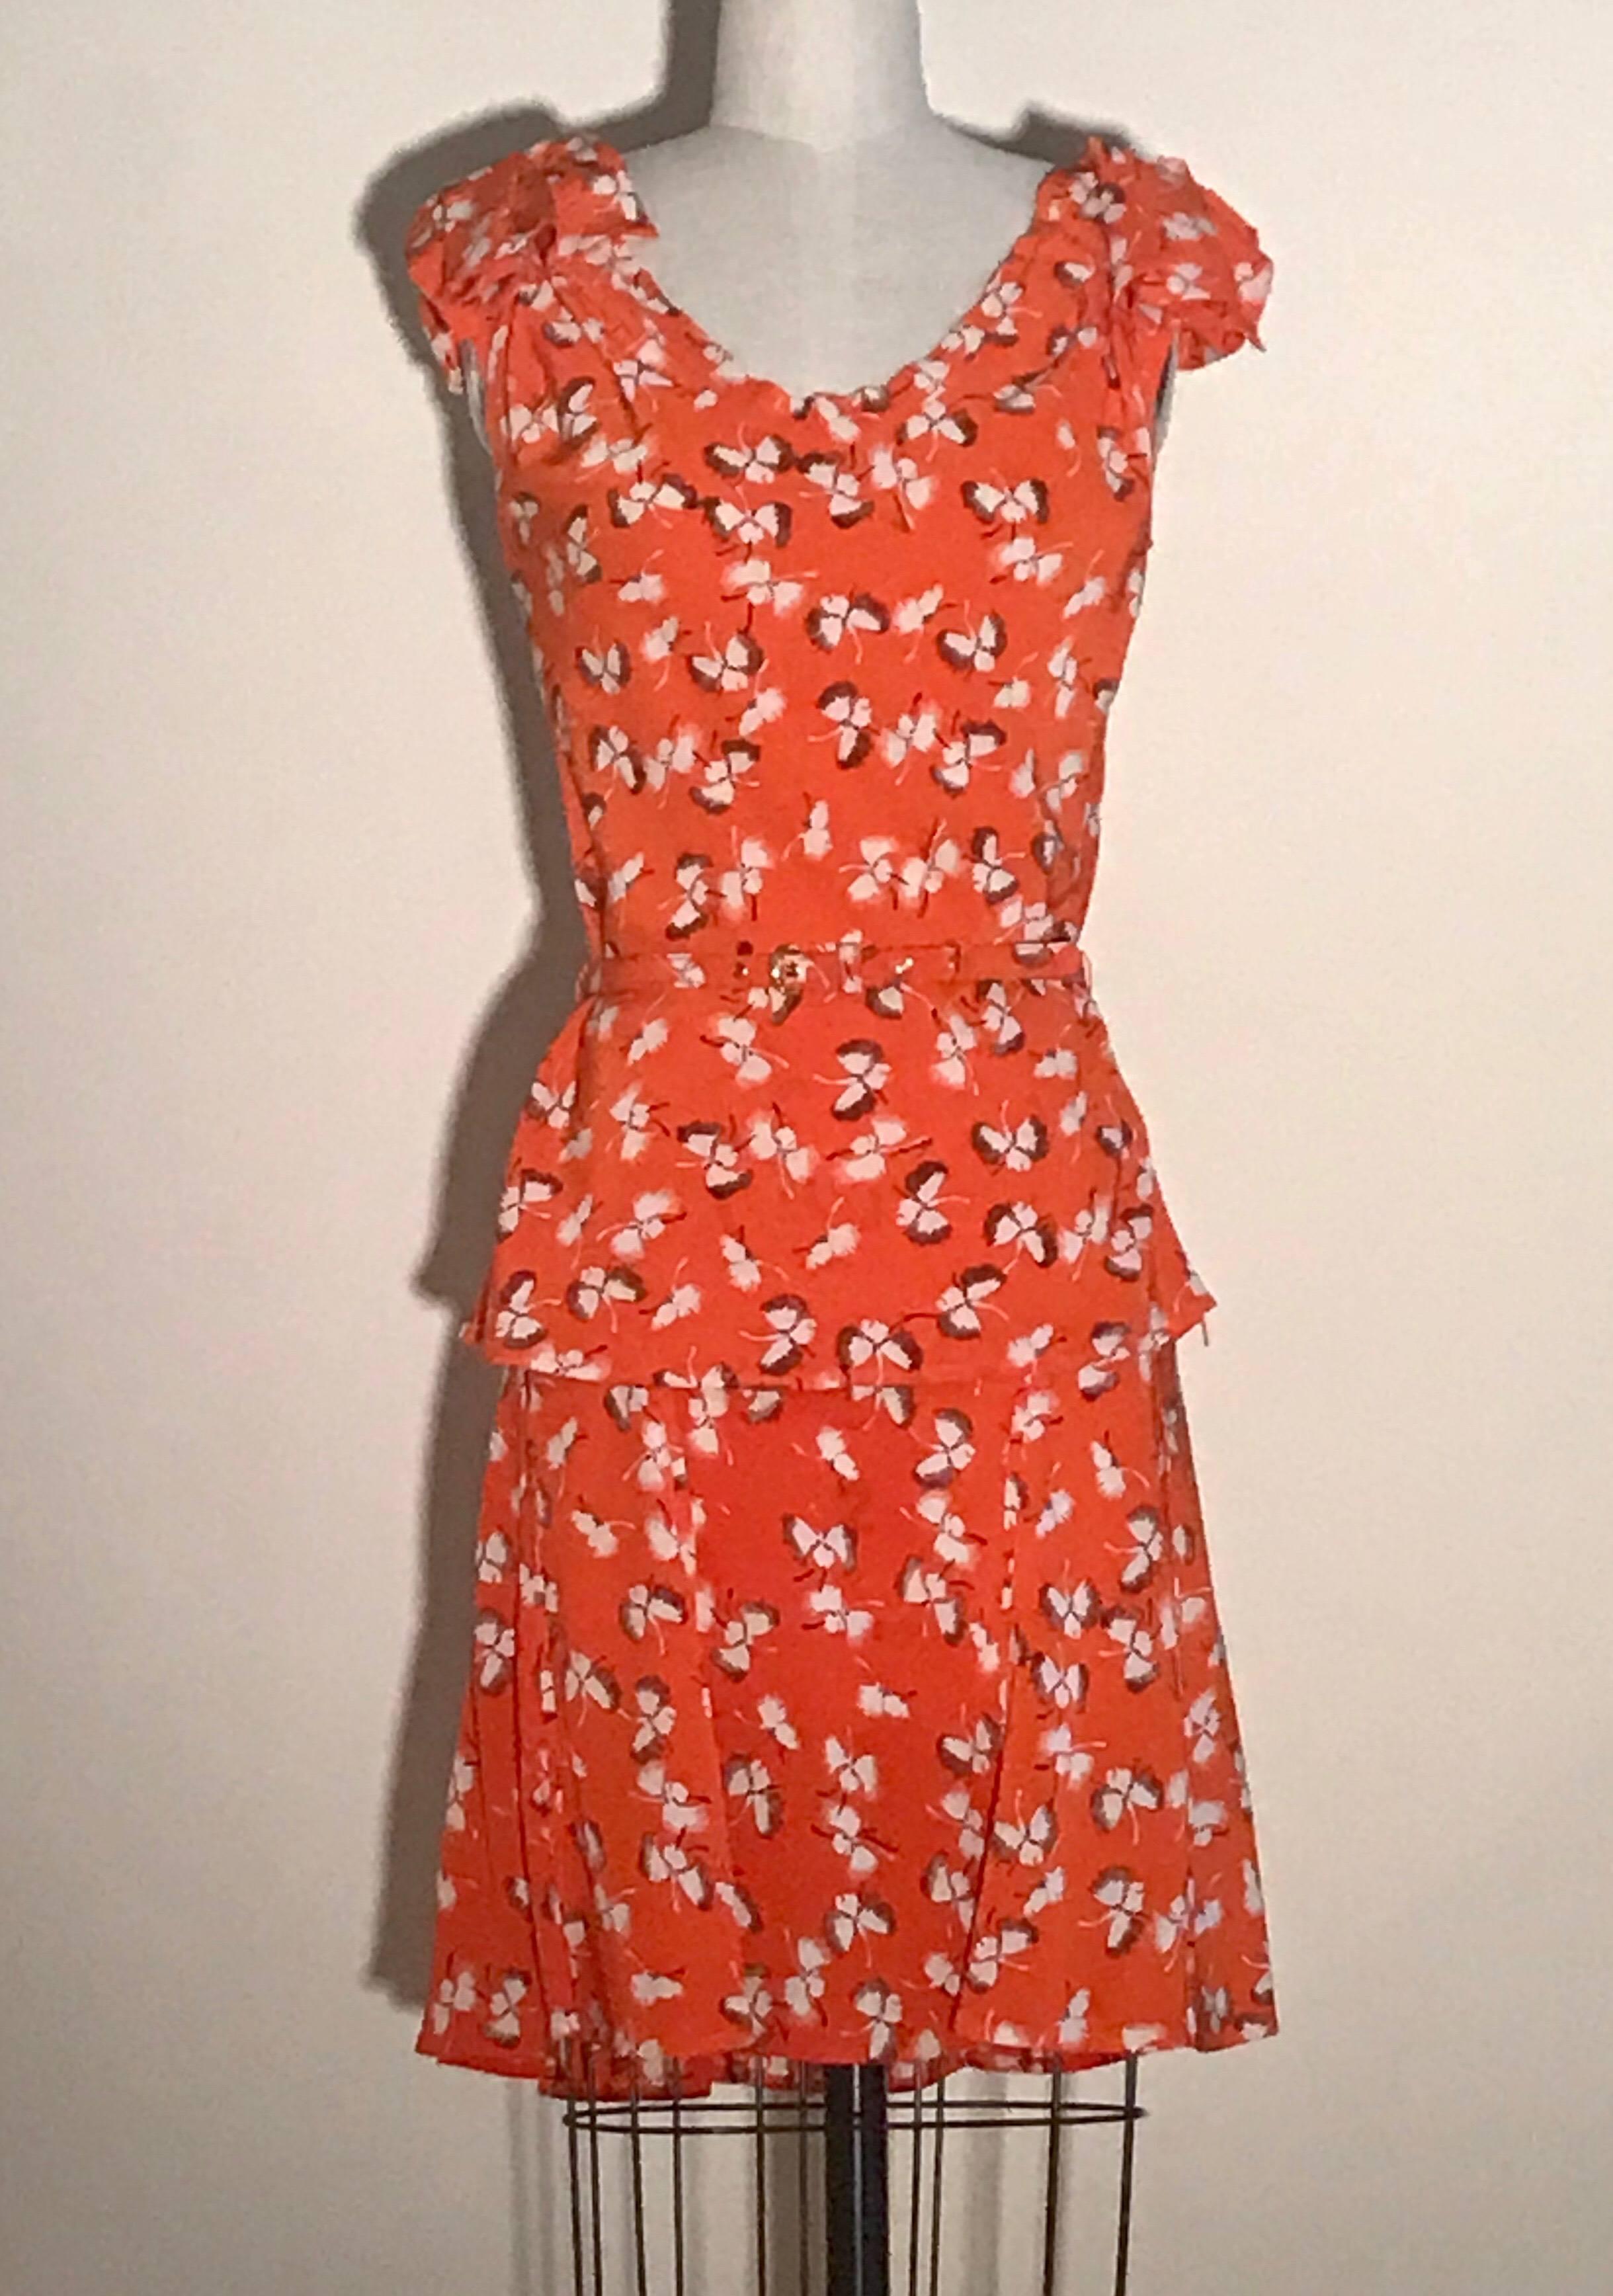 Gucci orange silk floral print three piece set. Includes sleeveless blouse with drape detail at shoulders, skinny belt, and skirt with seam detail throughout. Top has side zip, skirt has back zip. Two string loops at side for belt. 

So versatile--